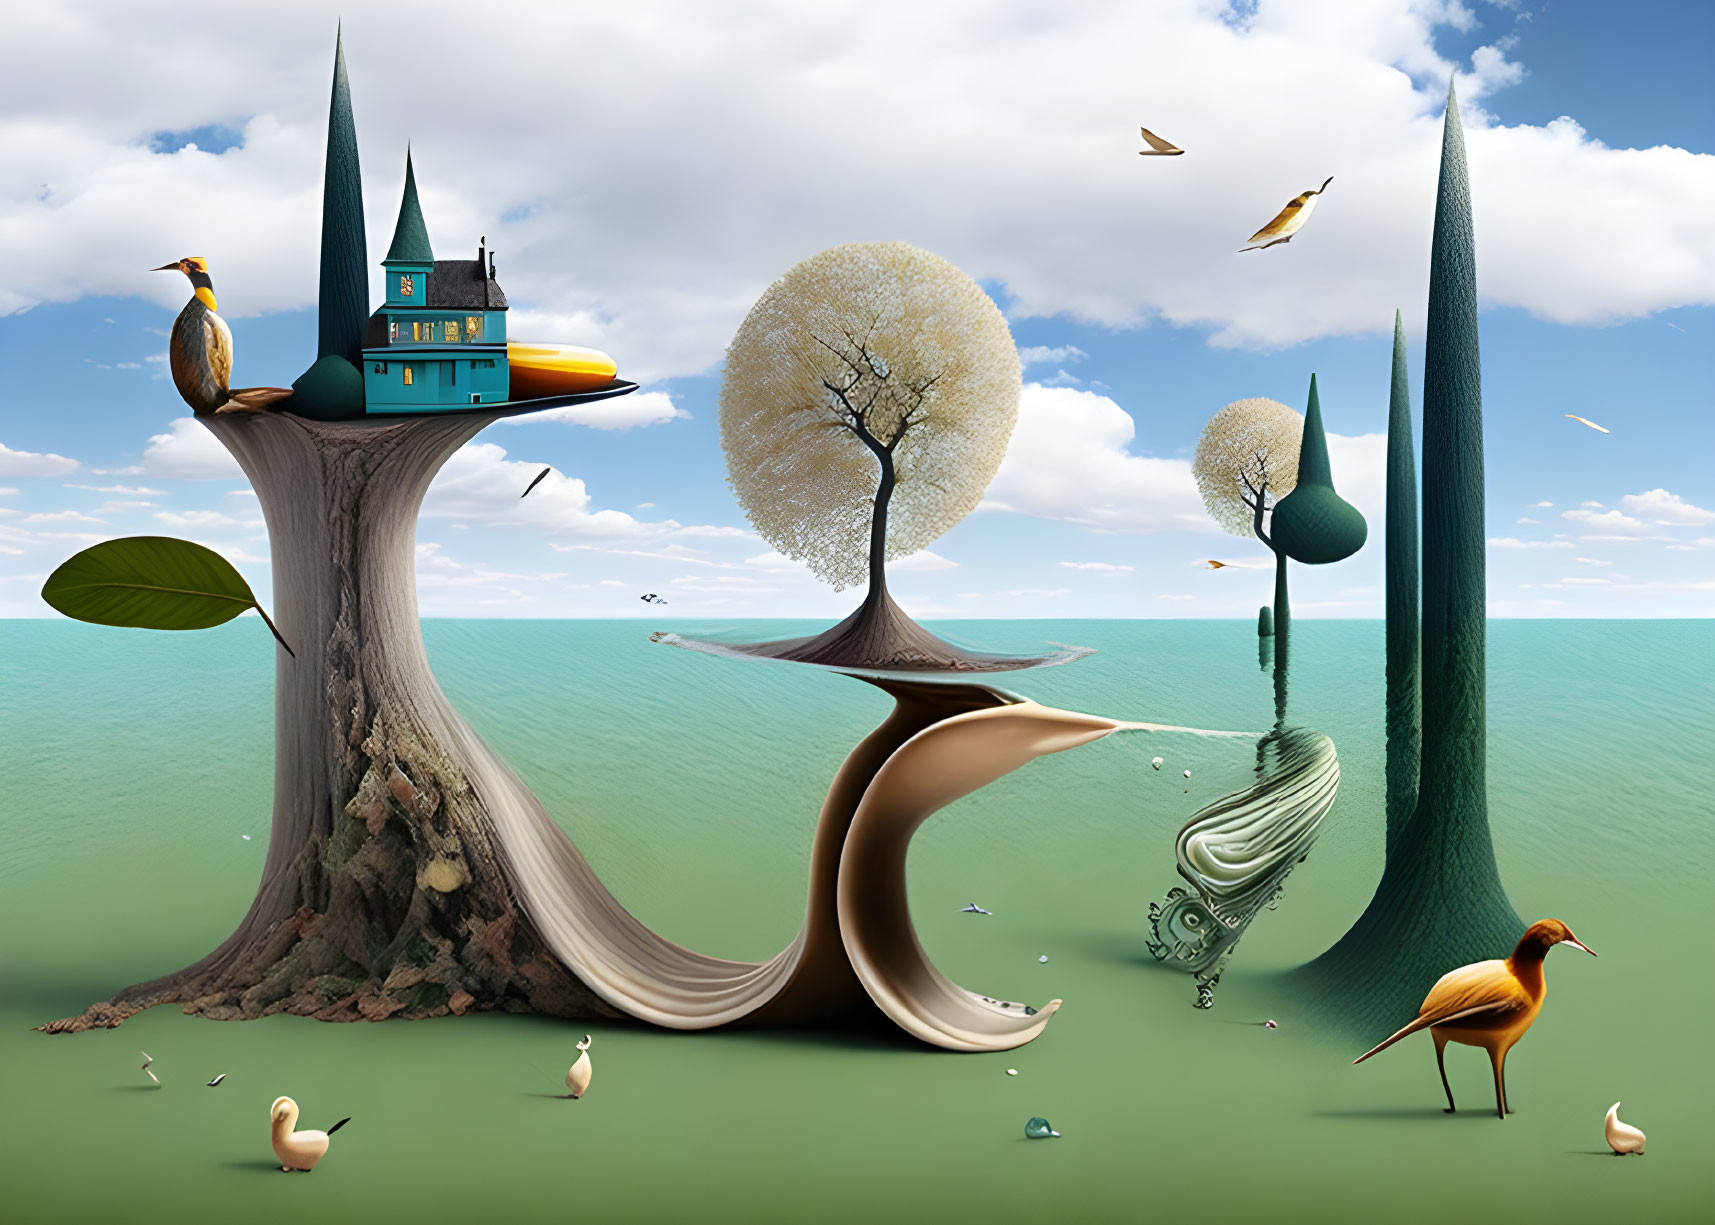 Surreal landscape with whimsical trees, house, birds, and mirror-like water